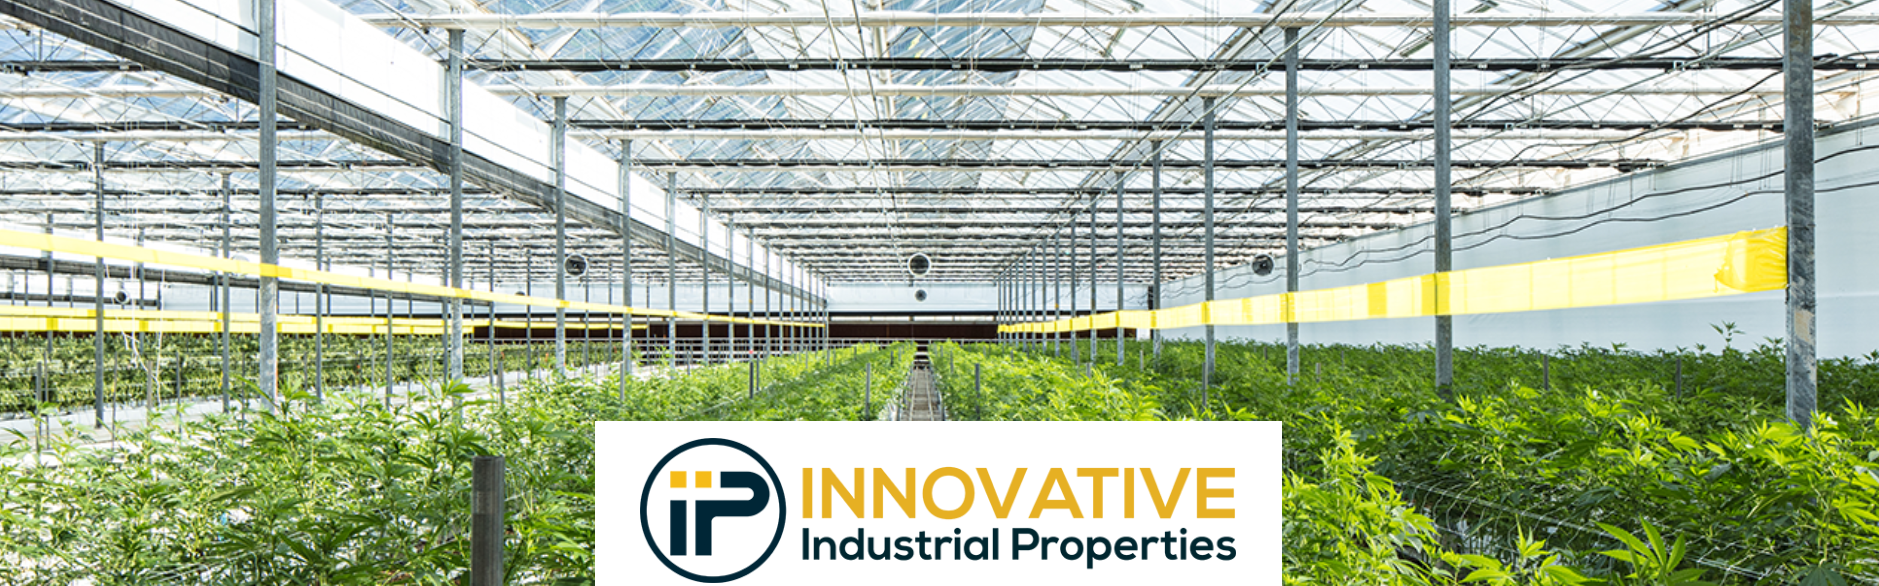 Cannabis REIT Innovative Industrial Properties Expands into Pennsylvania with $16.3 Million Investment